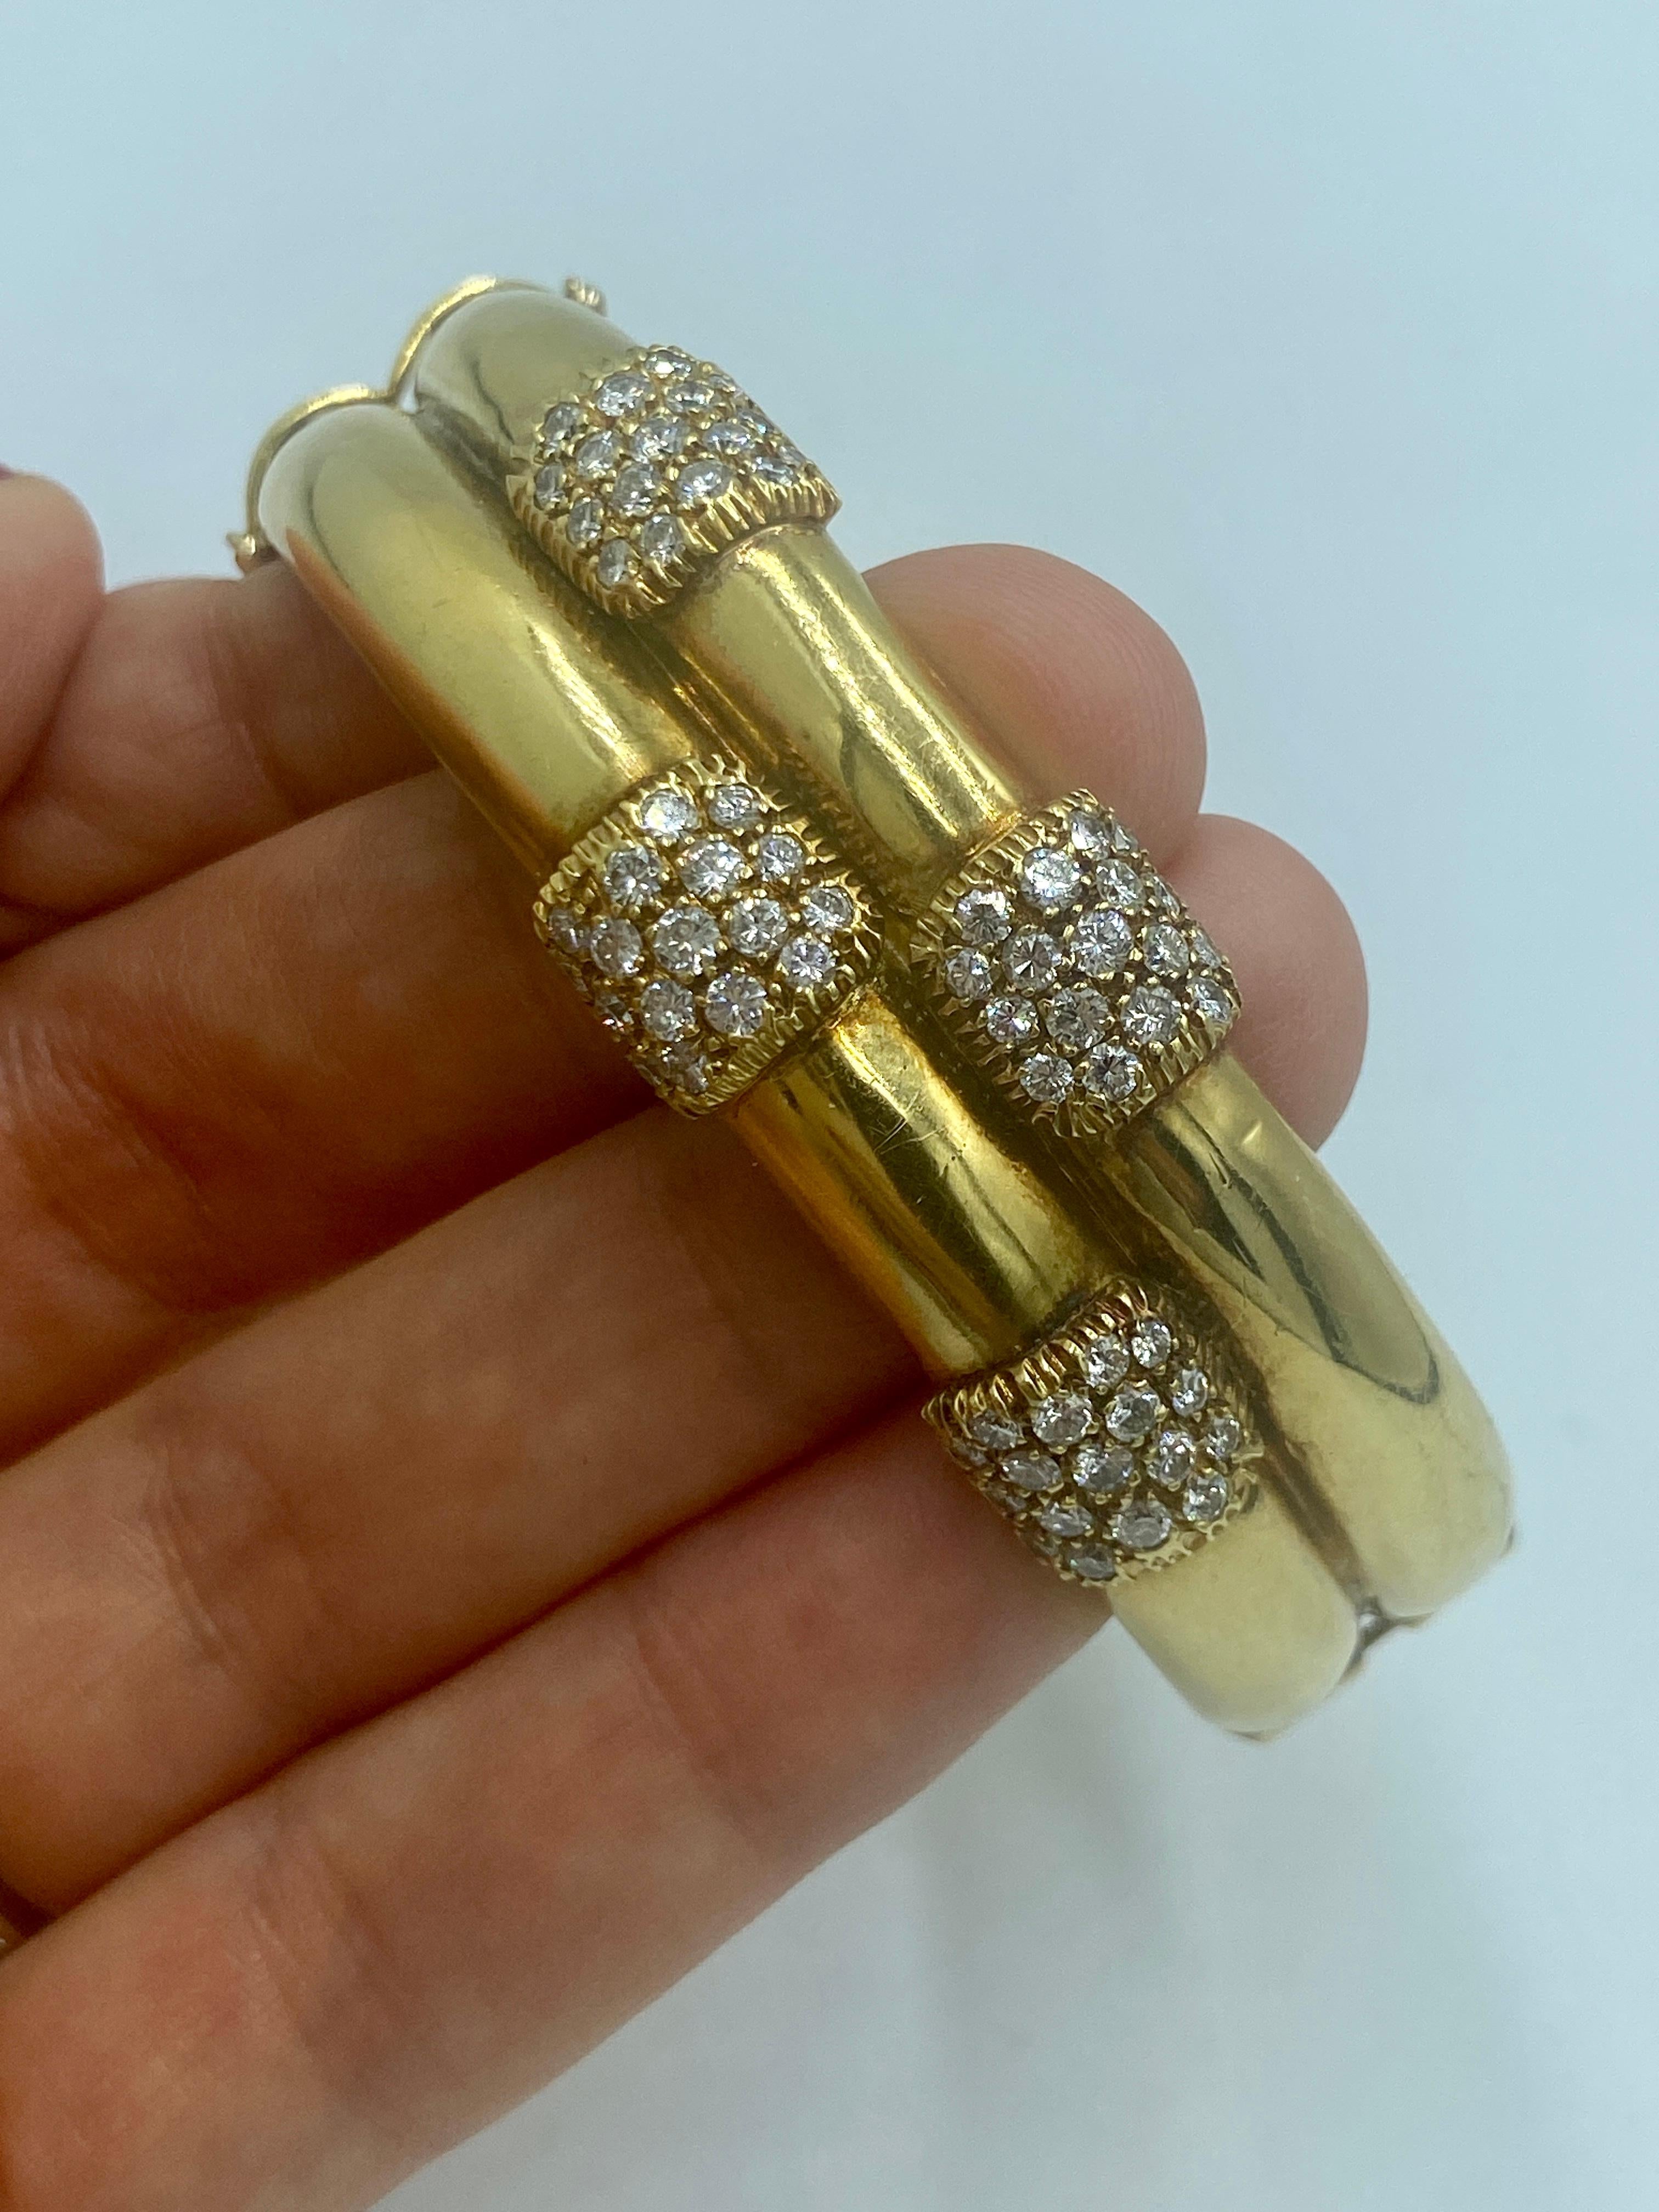 This 1970s European 18k gold bangle is in the shape of bamboo reeds adorned with approximately 2.7 carats of round cut diamonds. This beautifully made bracelet has an inner circumference of 18.5cm.